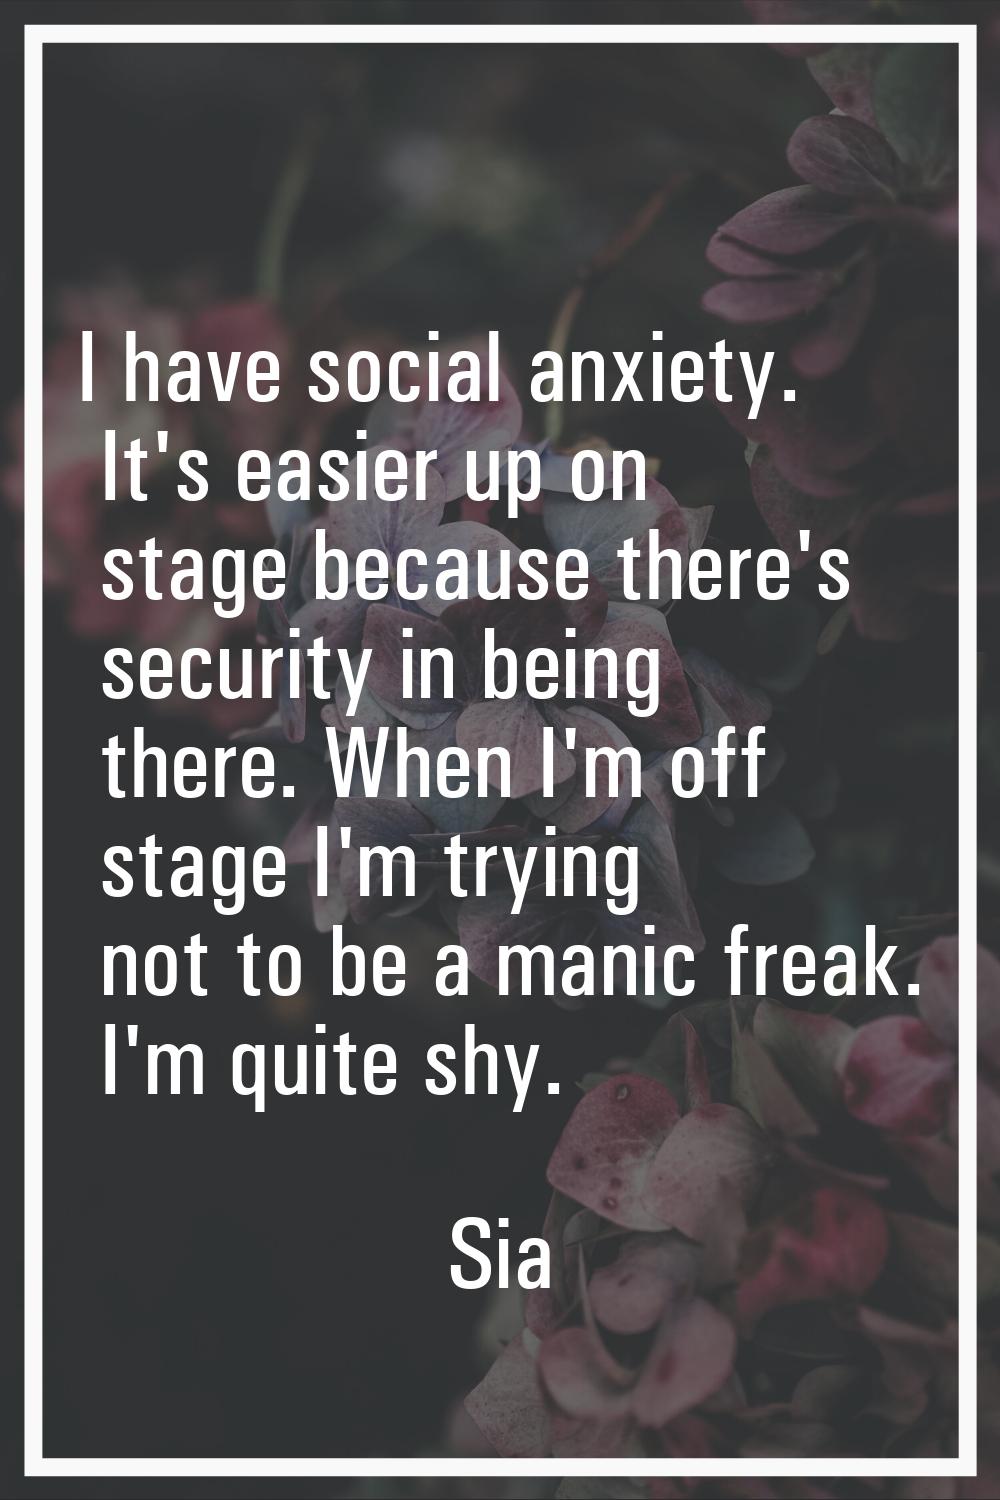 I have social anxiety. It's easier up on stage because there's security in being there. When I'm of